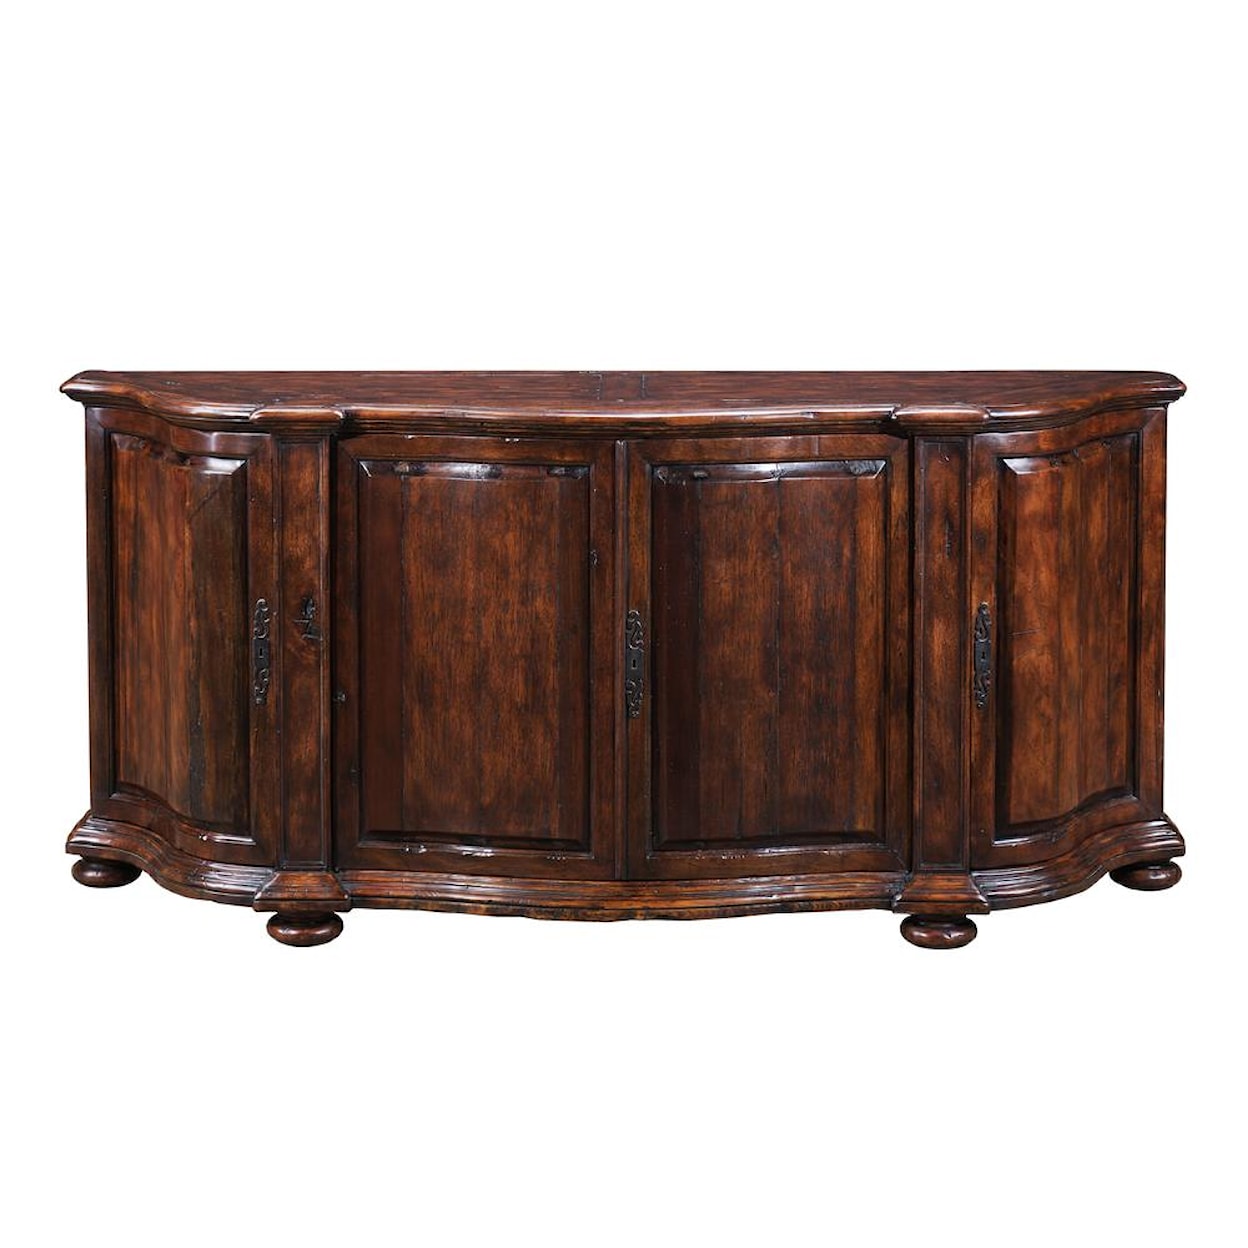 Theodore Alexander Cabinets and Sideboards Double Serpentine Sideboard